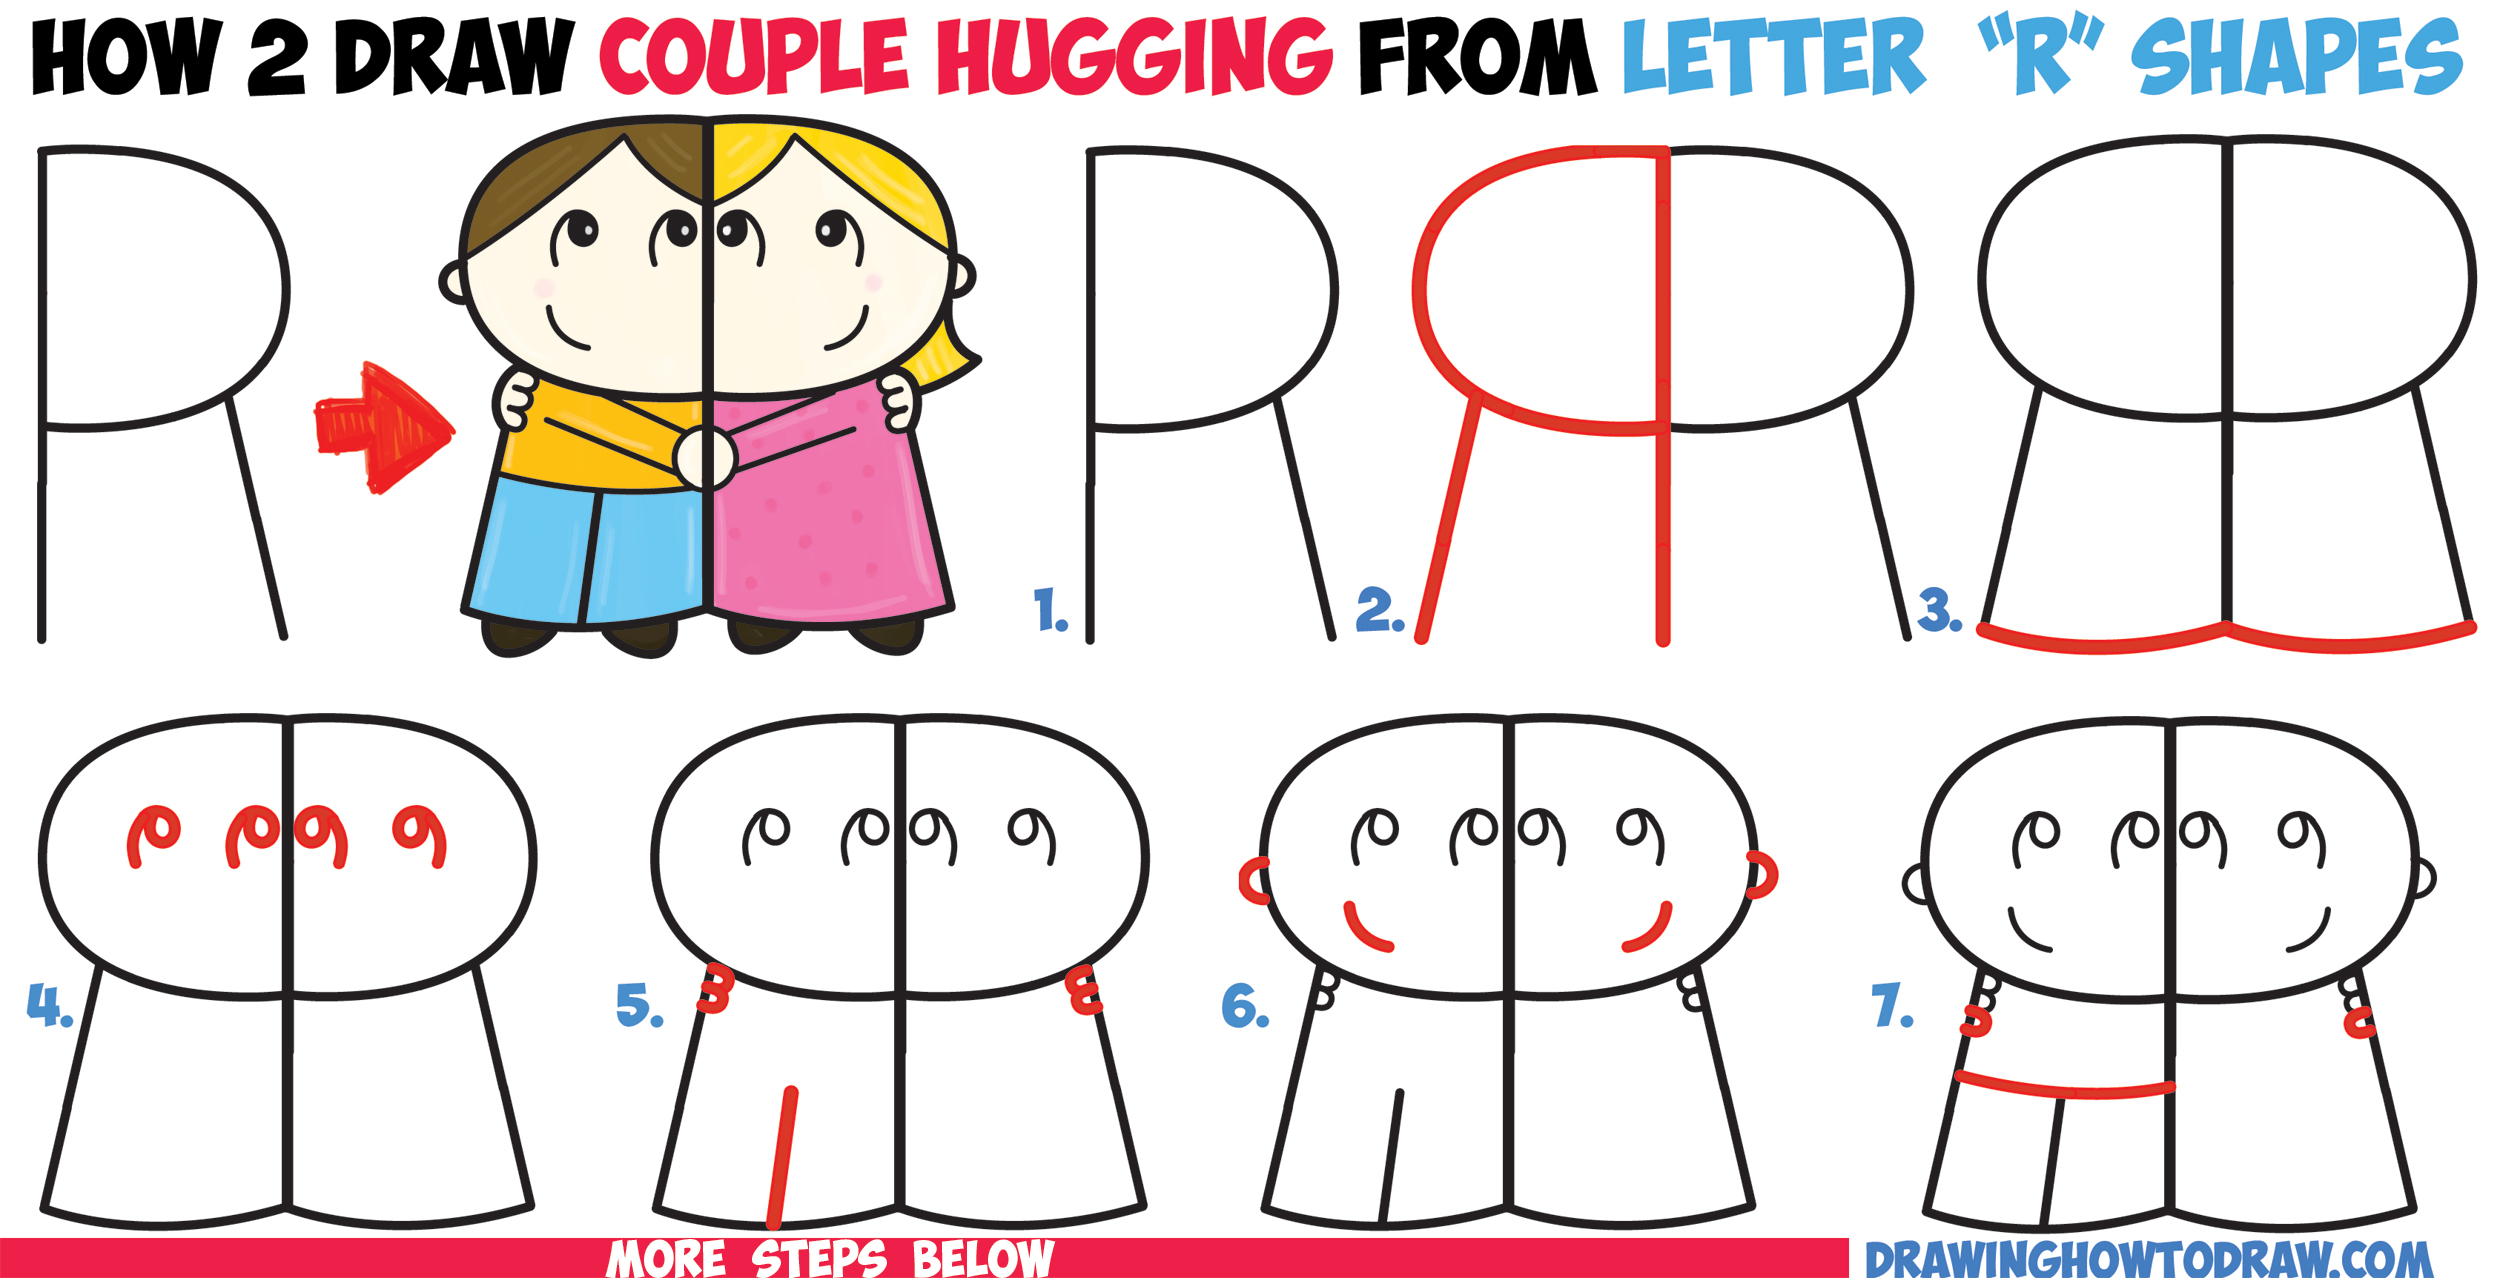 How to Draw Cartoon Couple (Girl and Boy) Hugging from Letter "R" Shapes Easy Step by Step Drawing Tutorial for Kids